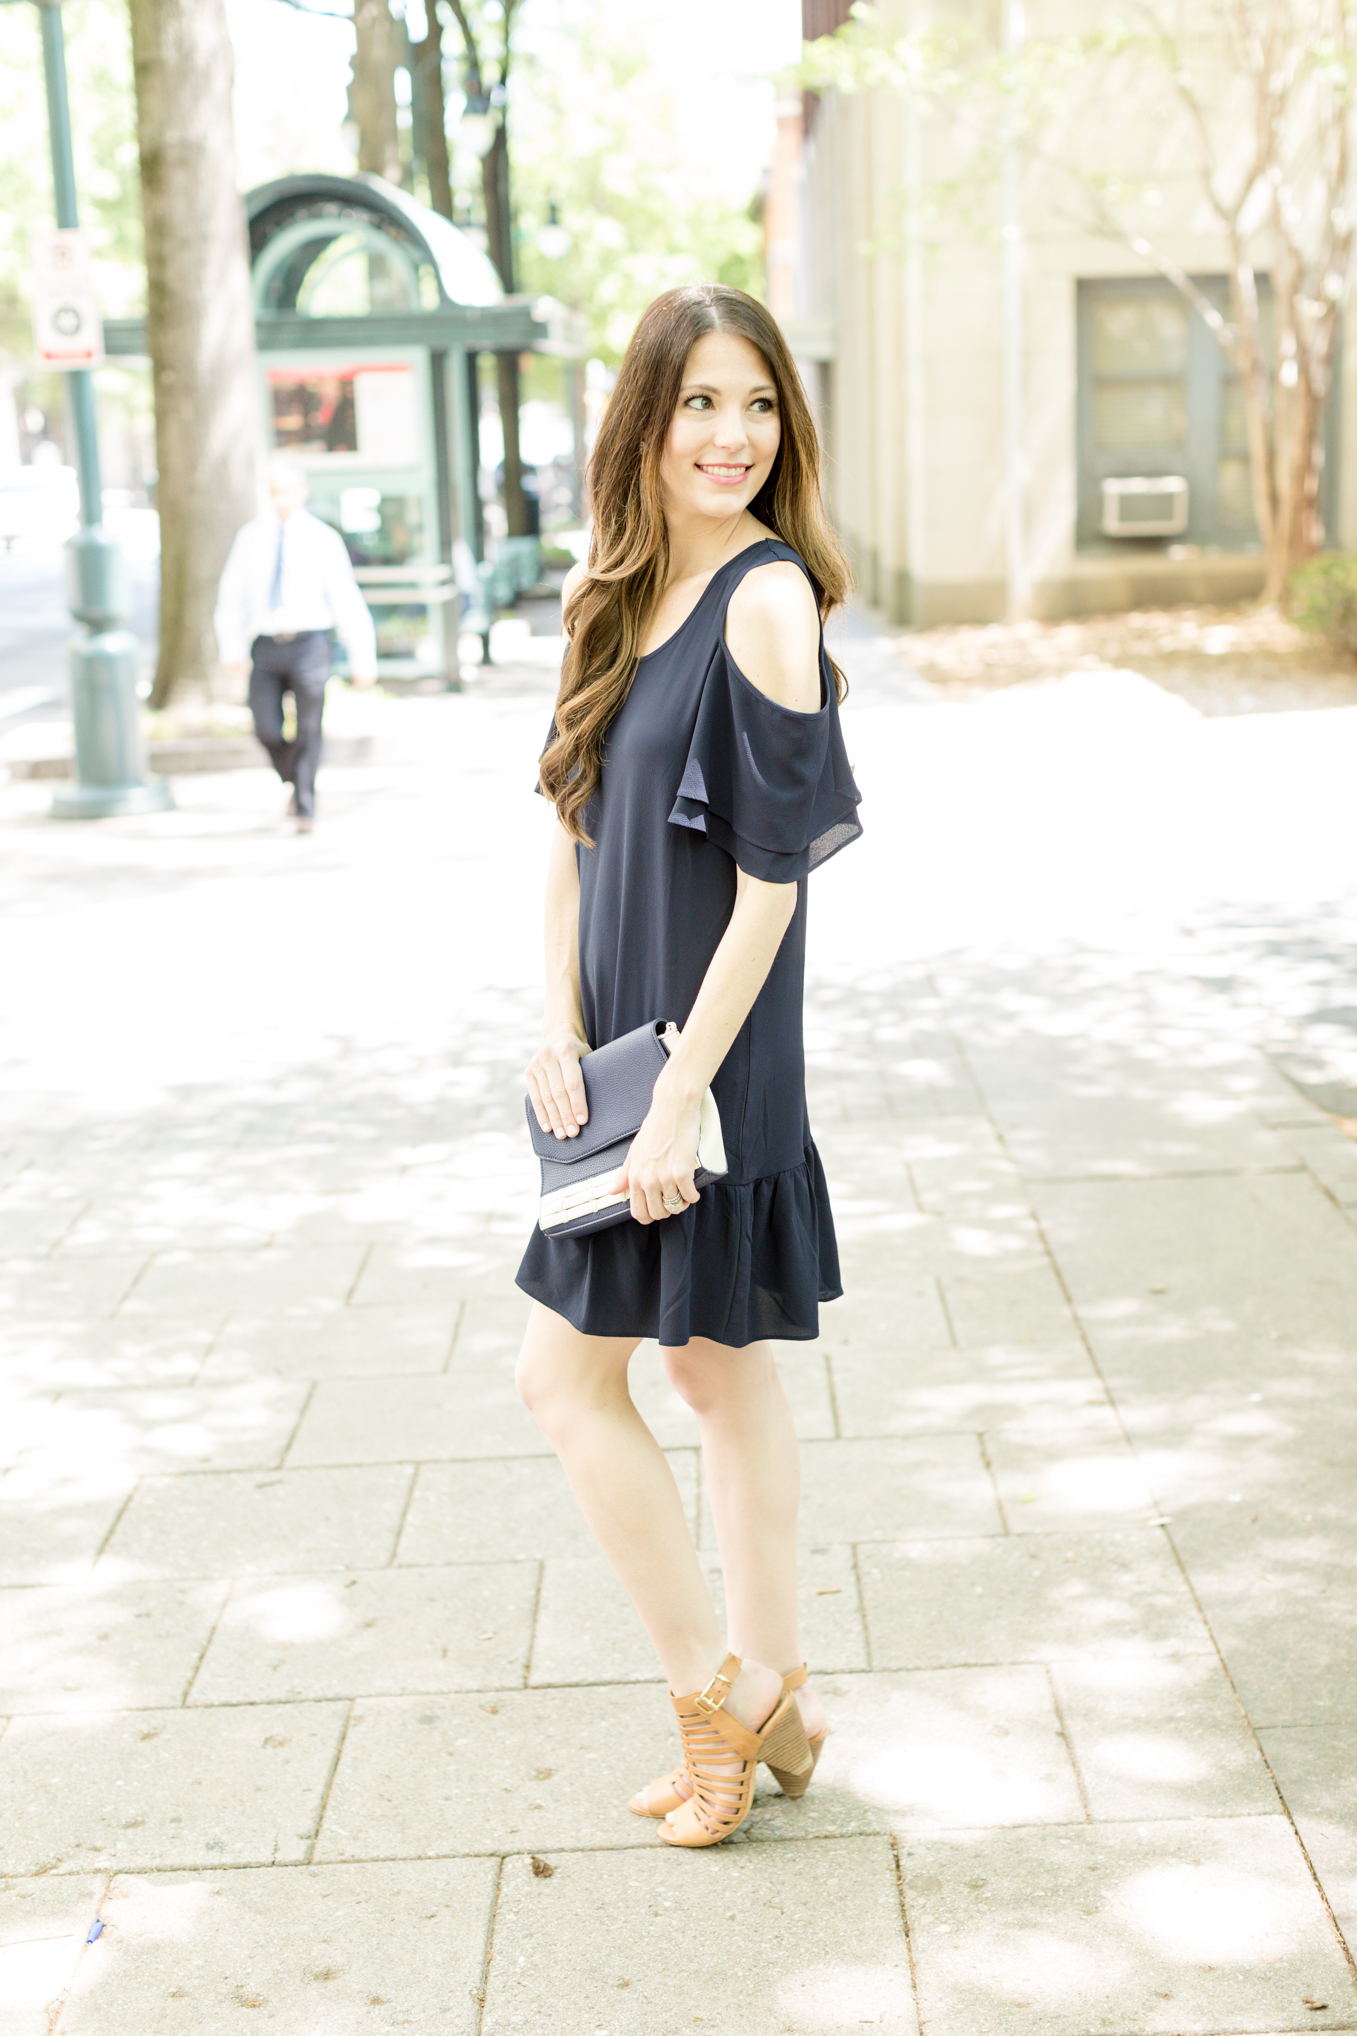 Little Navy Dress | Lifestyle blogger Elle Bowes shares a summer style twist on the LBD